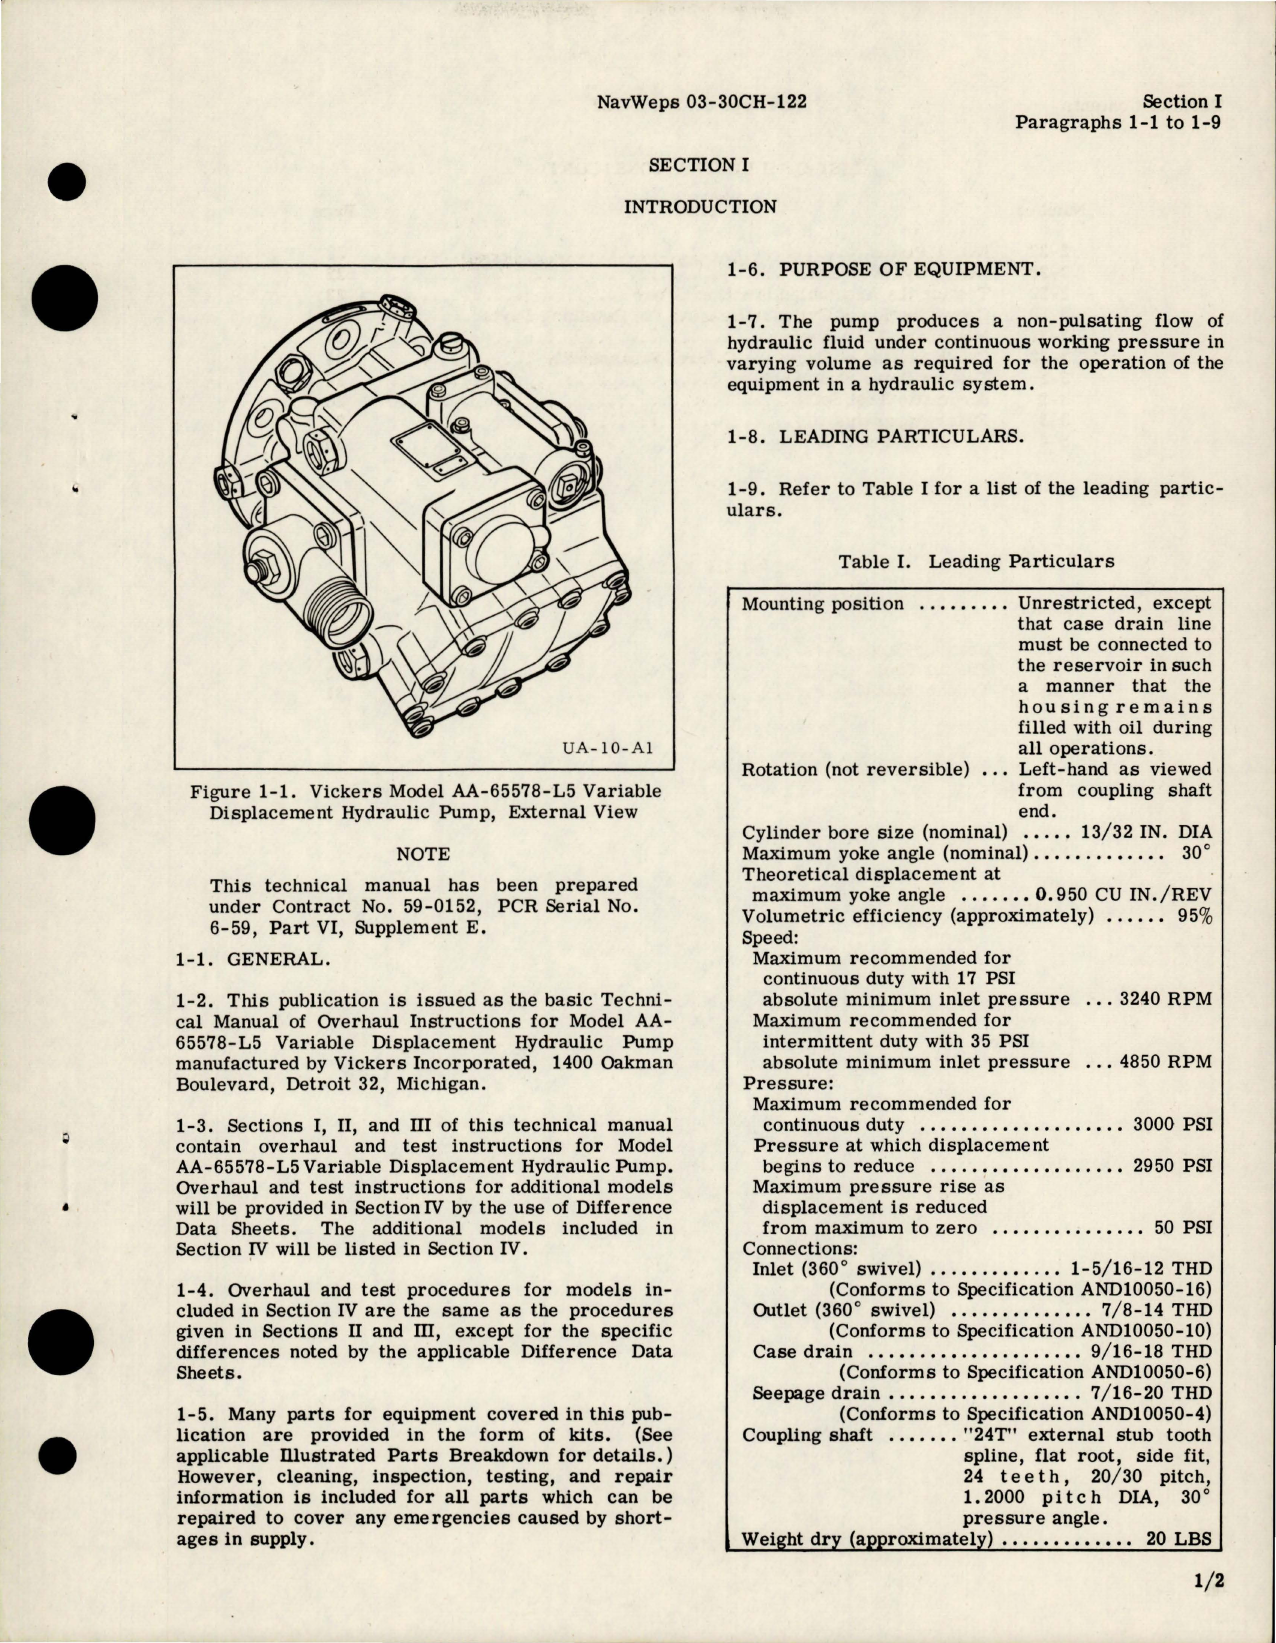 Sample page 5 from AirCorps Library document: Overhaul Instructions for Variable Displacement Hydraulic Pump Assembly - Model AA-65578-L5 